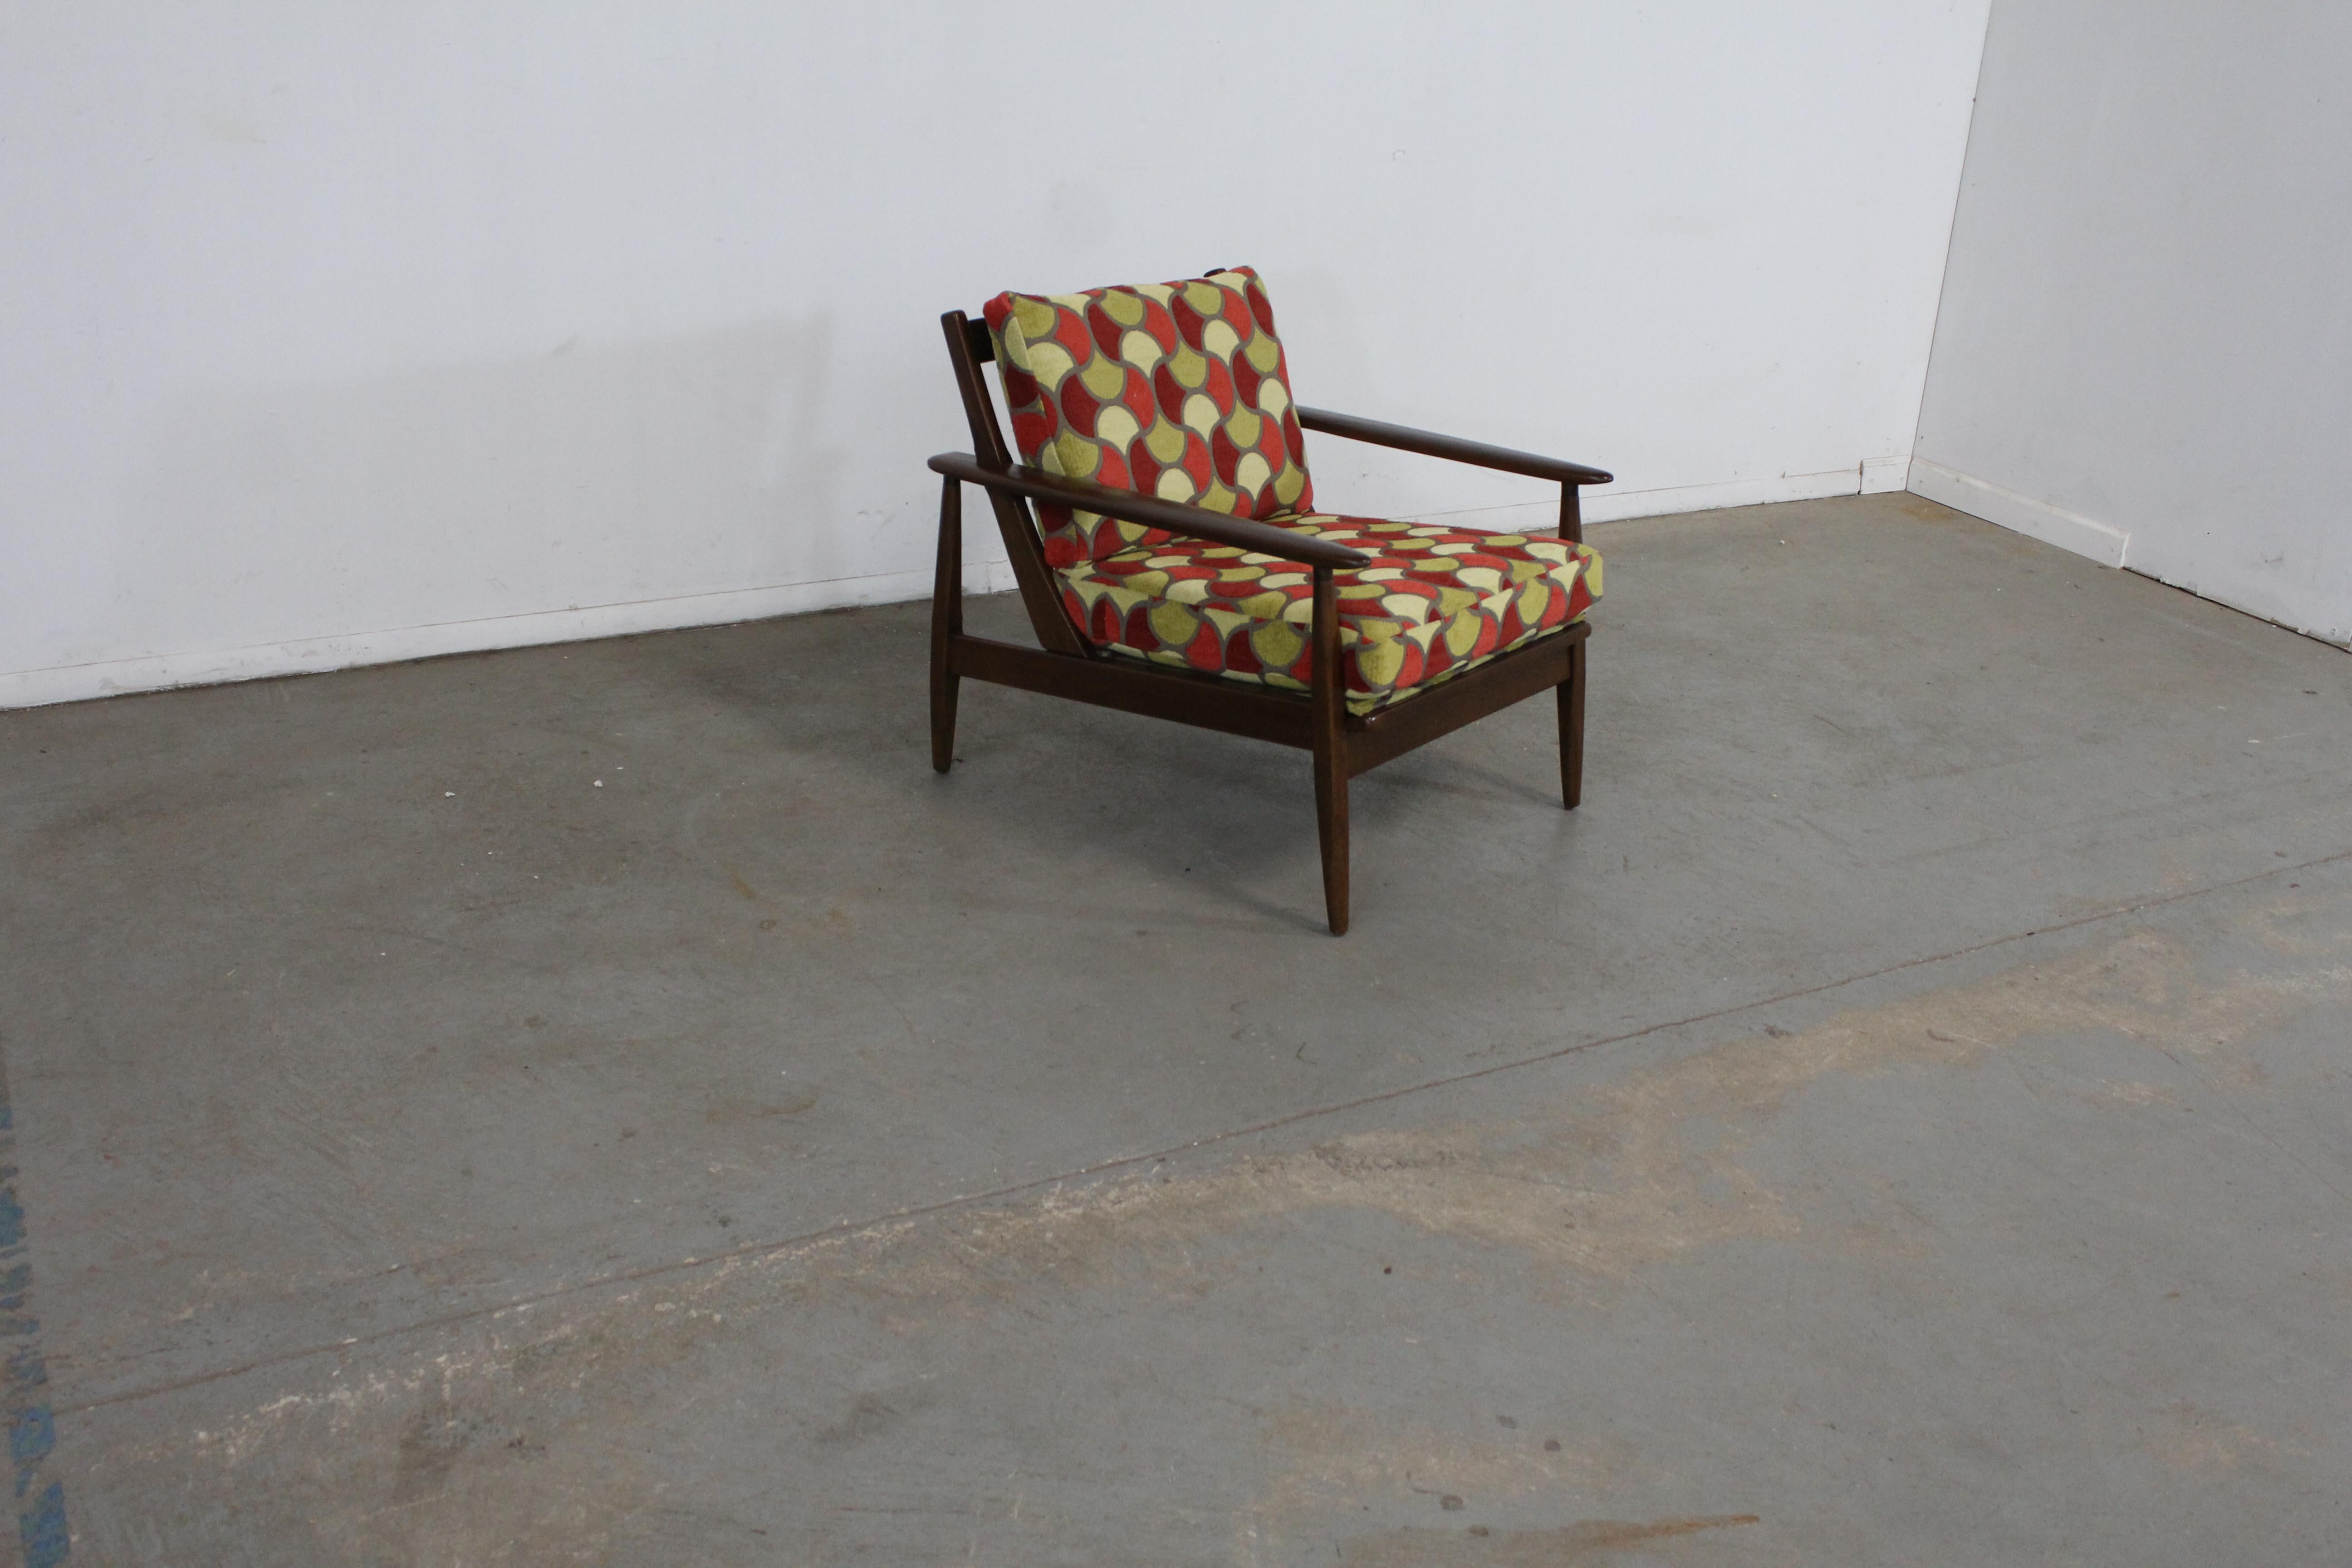 Mid-Century Modern walnut open arm rocking / lounge chair.

Offered is a Mid-Century Modern open arm rocking / lounge chair. This piece is made of walnut and has been restores and  upholstered with textured retro geometric fabric. Ready for any